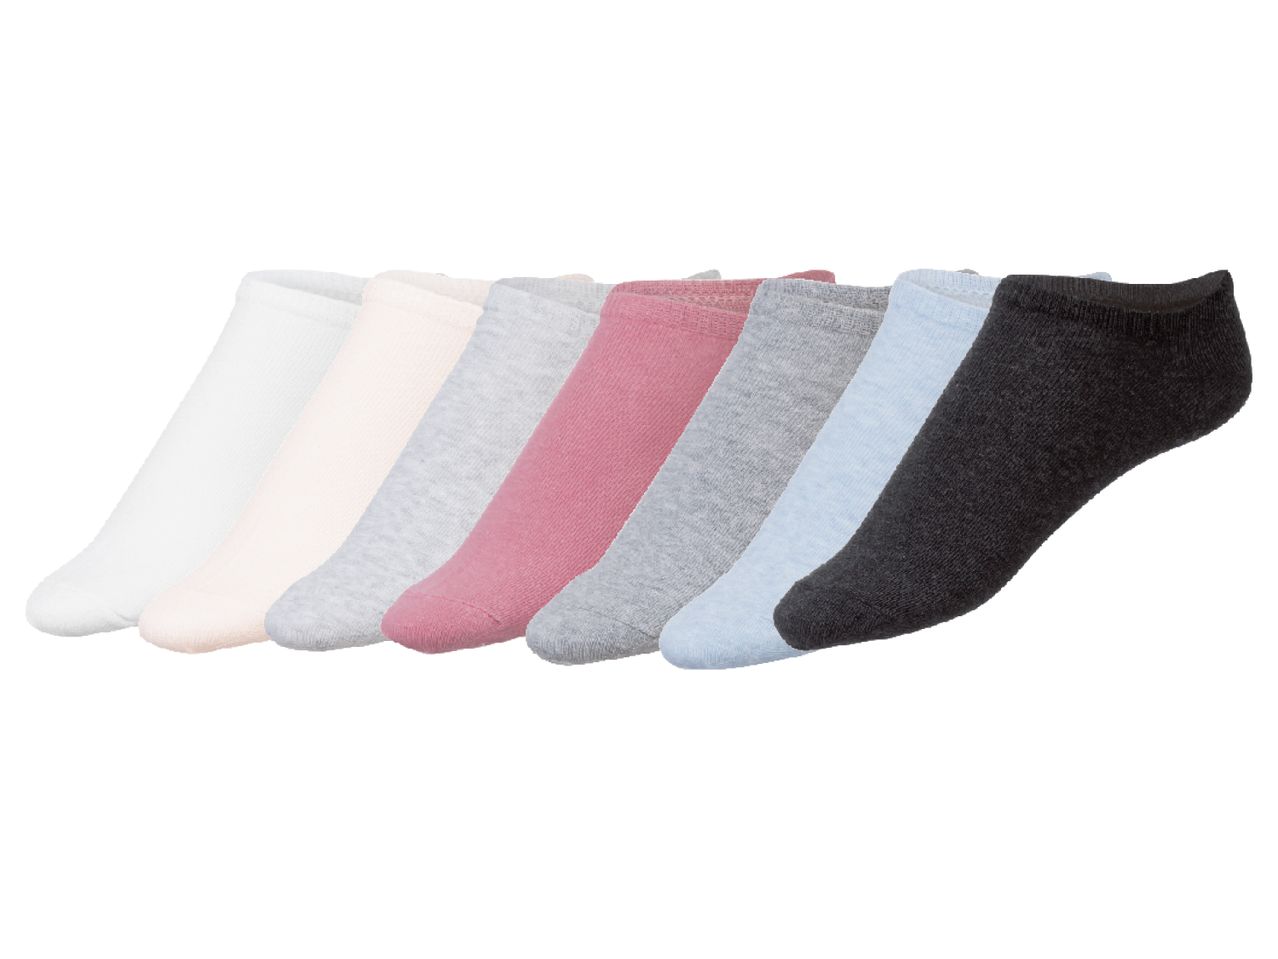 Go to full screen view: Ladies’ Trainer Socks - Image 1